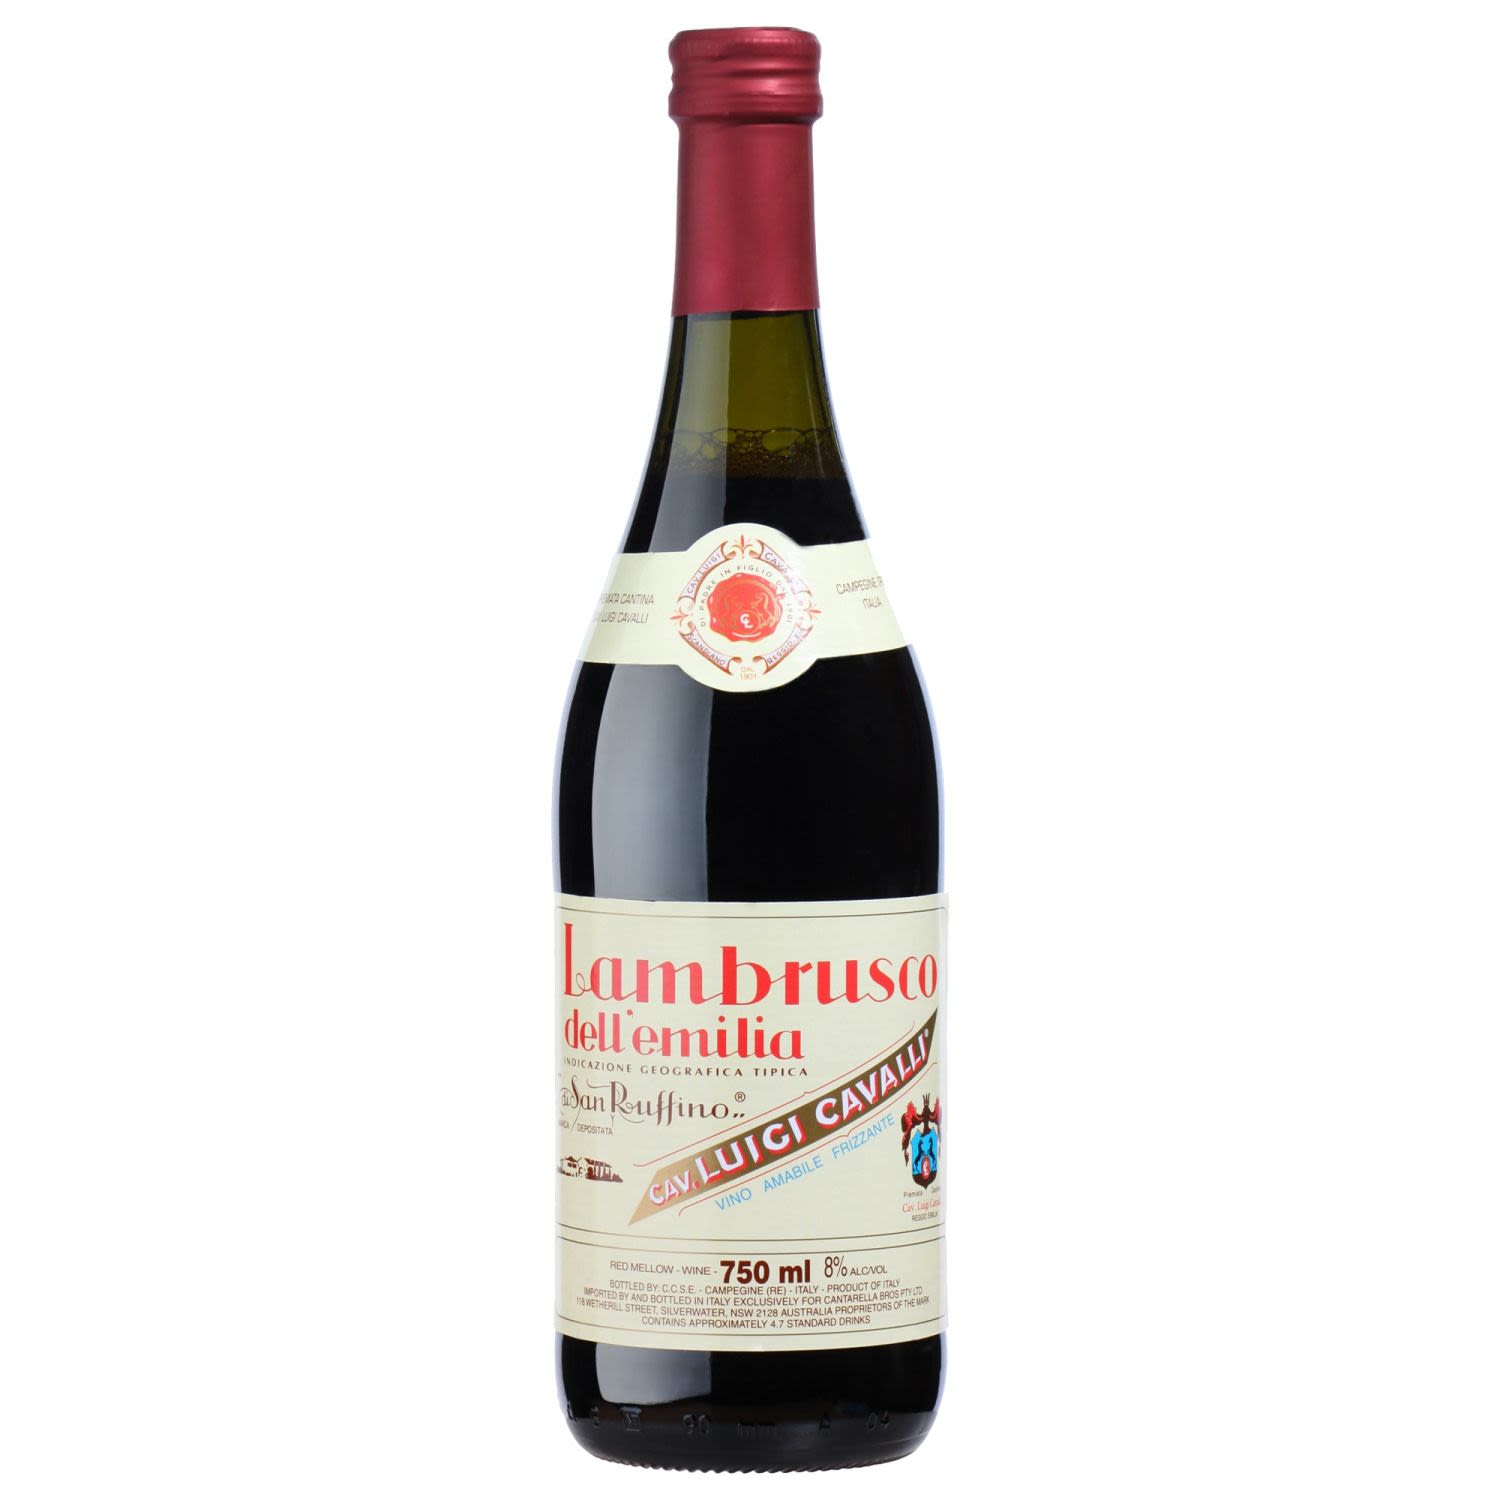 Luigi Cavalli Red Lambrusco is a medium sweet frizzante style of Lambrusco showing bright red berries, sweet fruit and a delightfully fine mouthfilling mousse. Best served chilled.<br /> <br />Alcohol Volume: 14.00%<br /><br />Pack Format: Bottle<br /><br />Standard Drinks: 4.7<br /><br />Pack Type: Bottle<br /><br />Country of Origin: Italy<br /><br />Region: IGT San Ruffino<br /><br />Vintage: Vintages Vary<br />